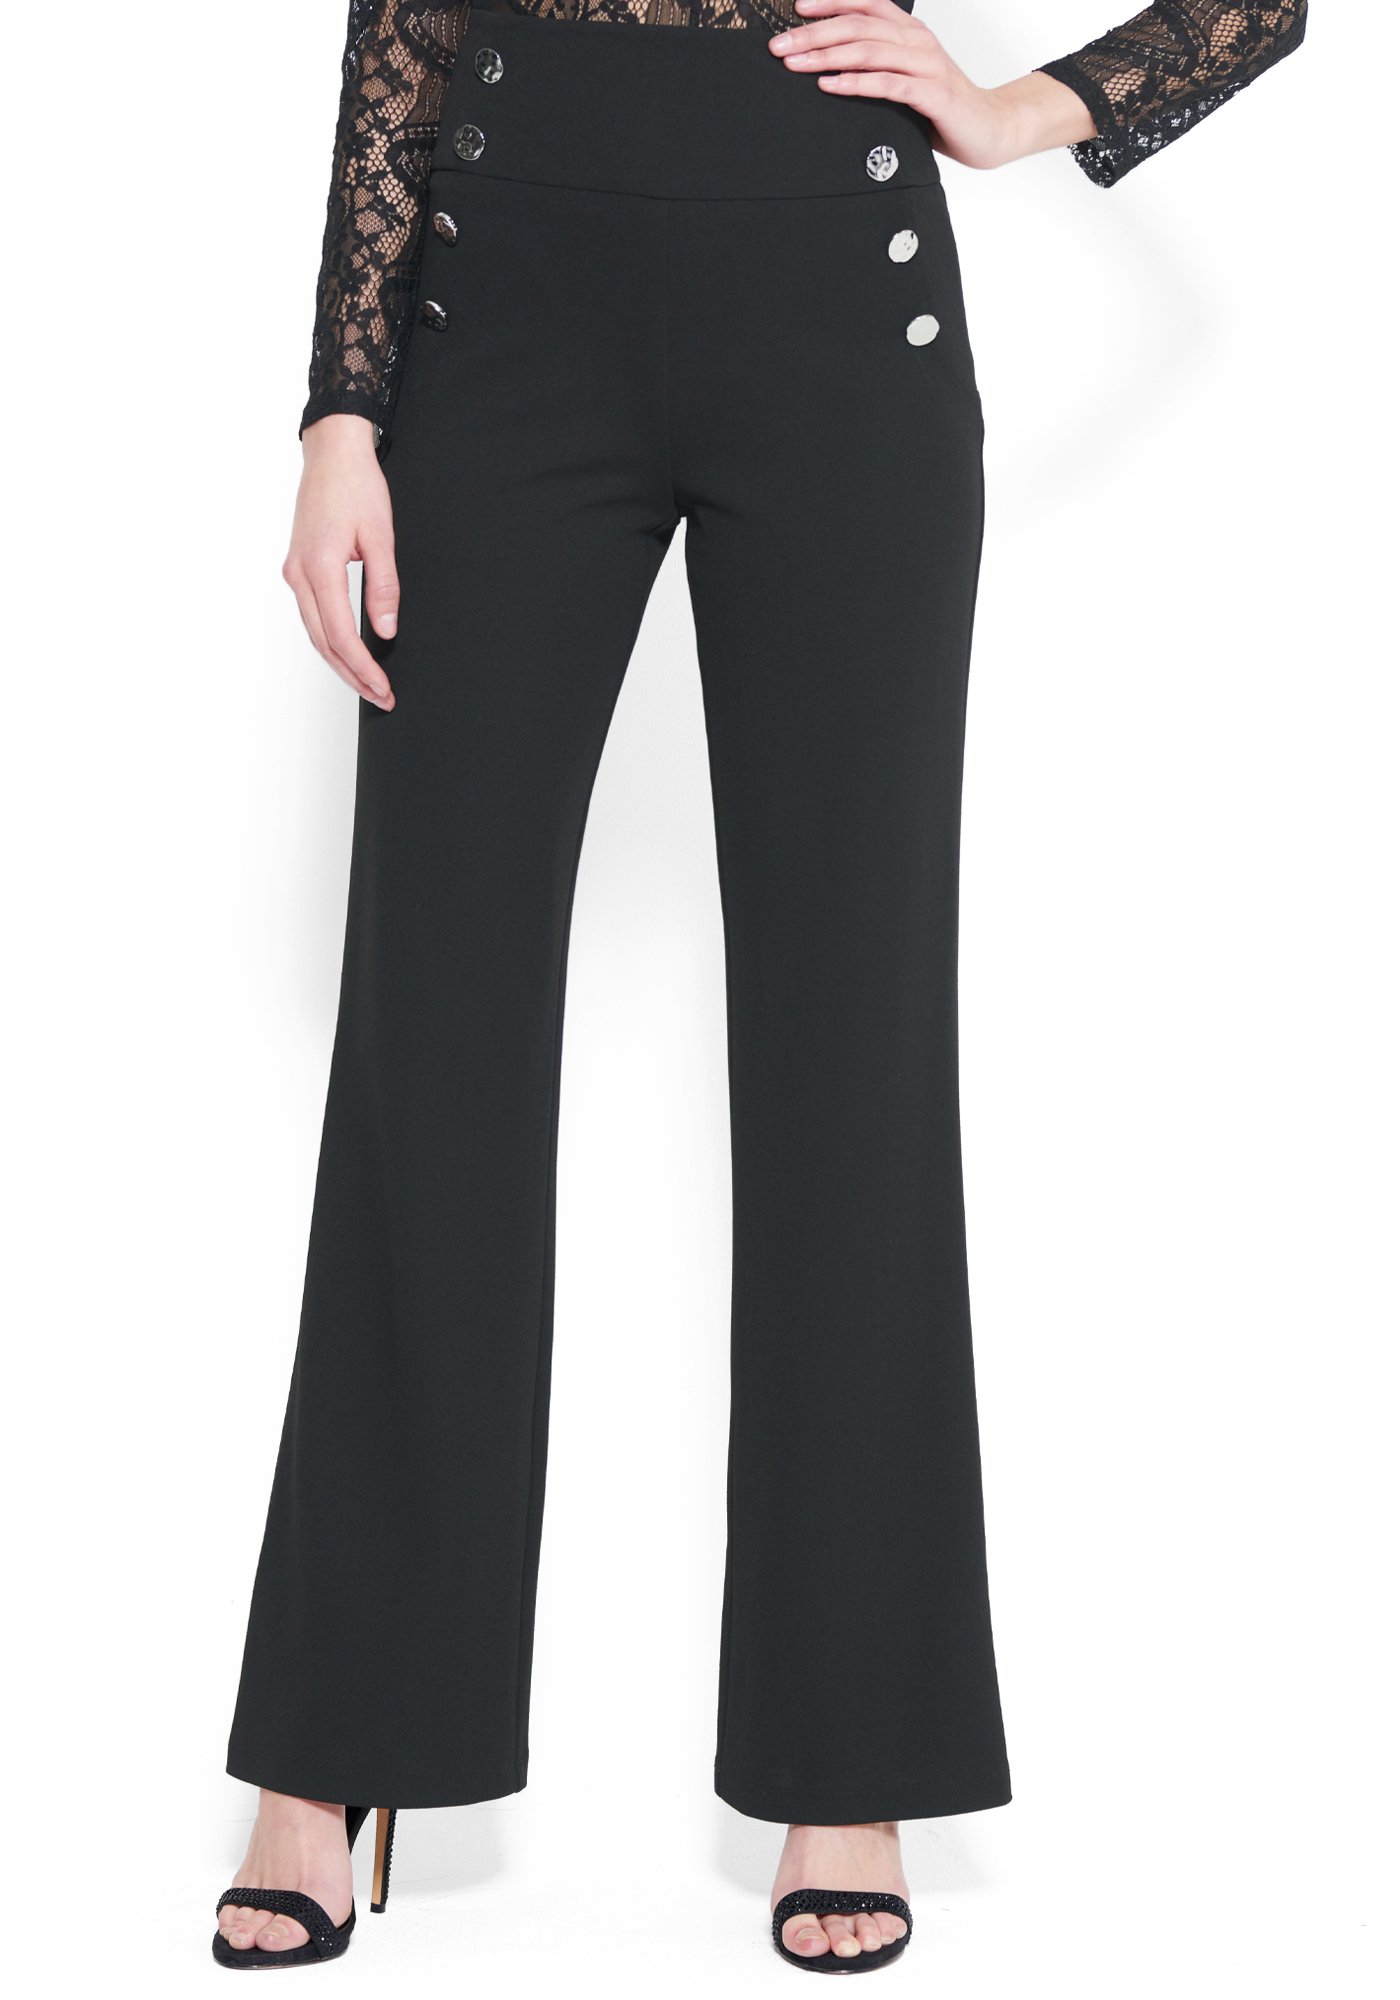 Bebe Women's High Waist Wide Leg Button Pant, Size 4 in BLACK Polyester